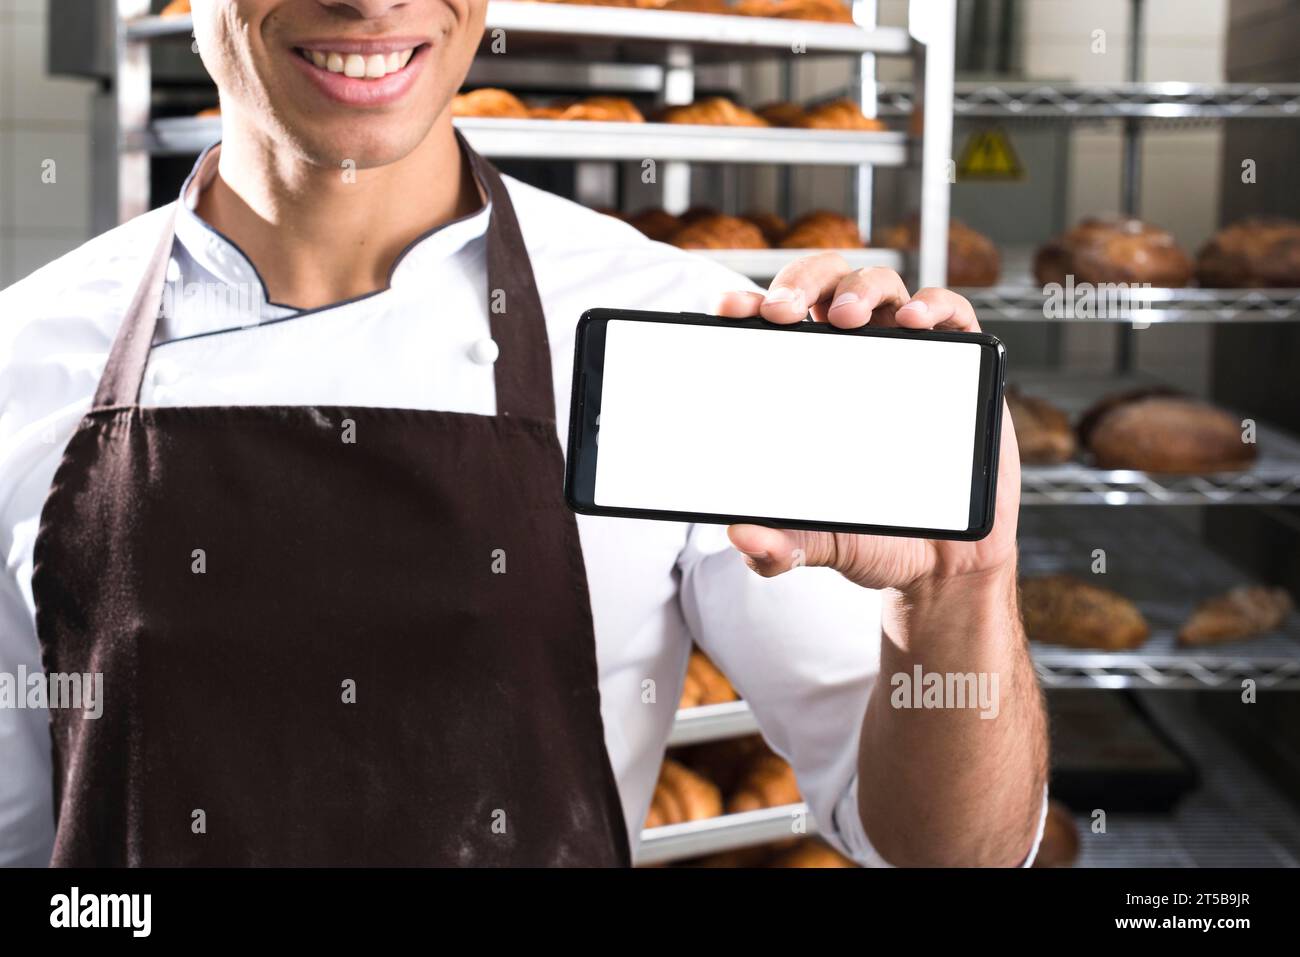 Chef showing screen phone Stock Photo